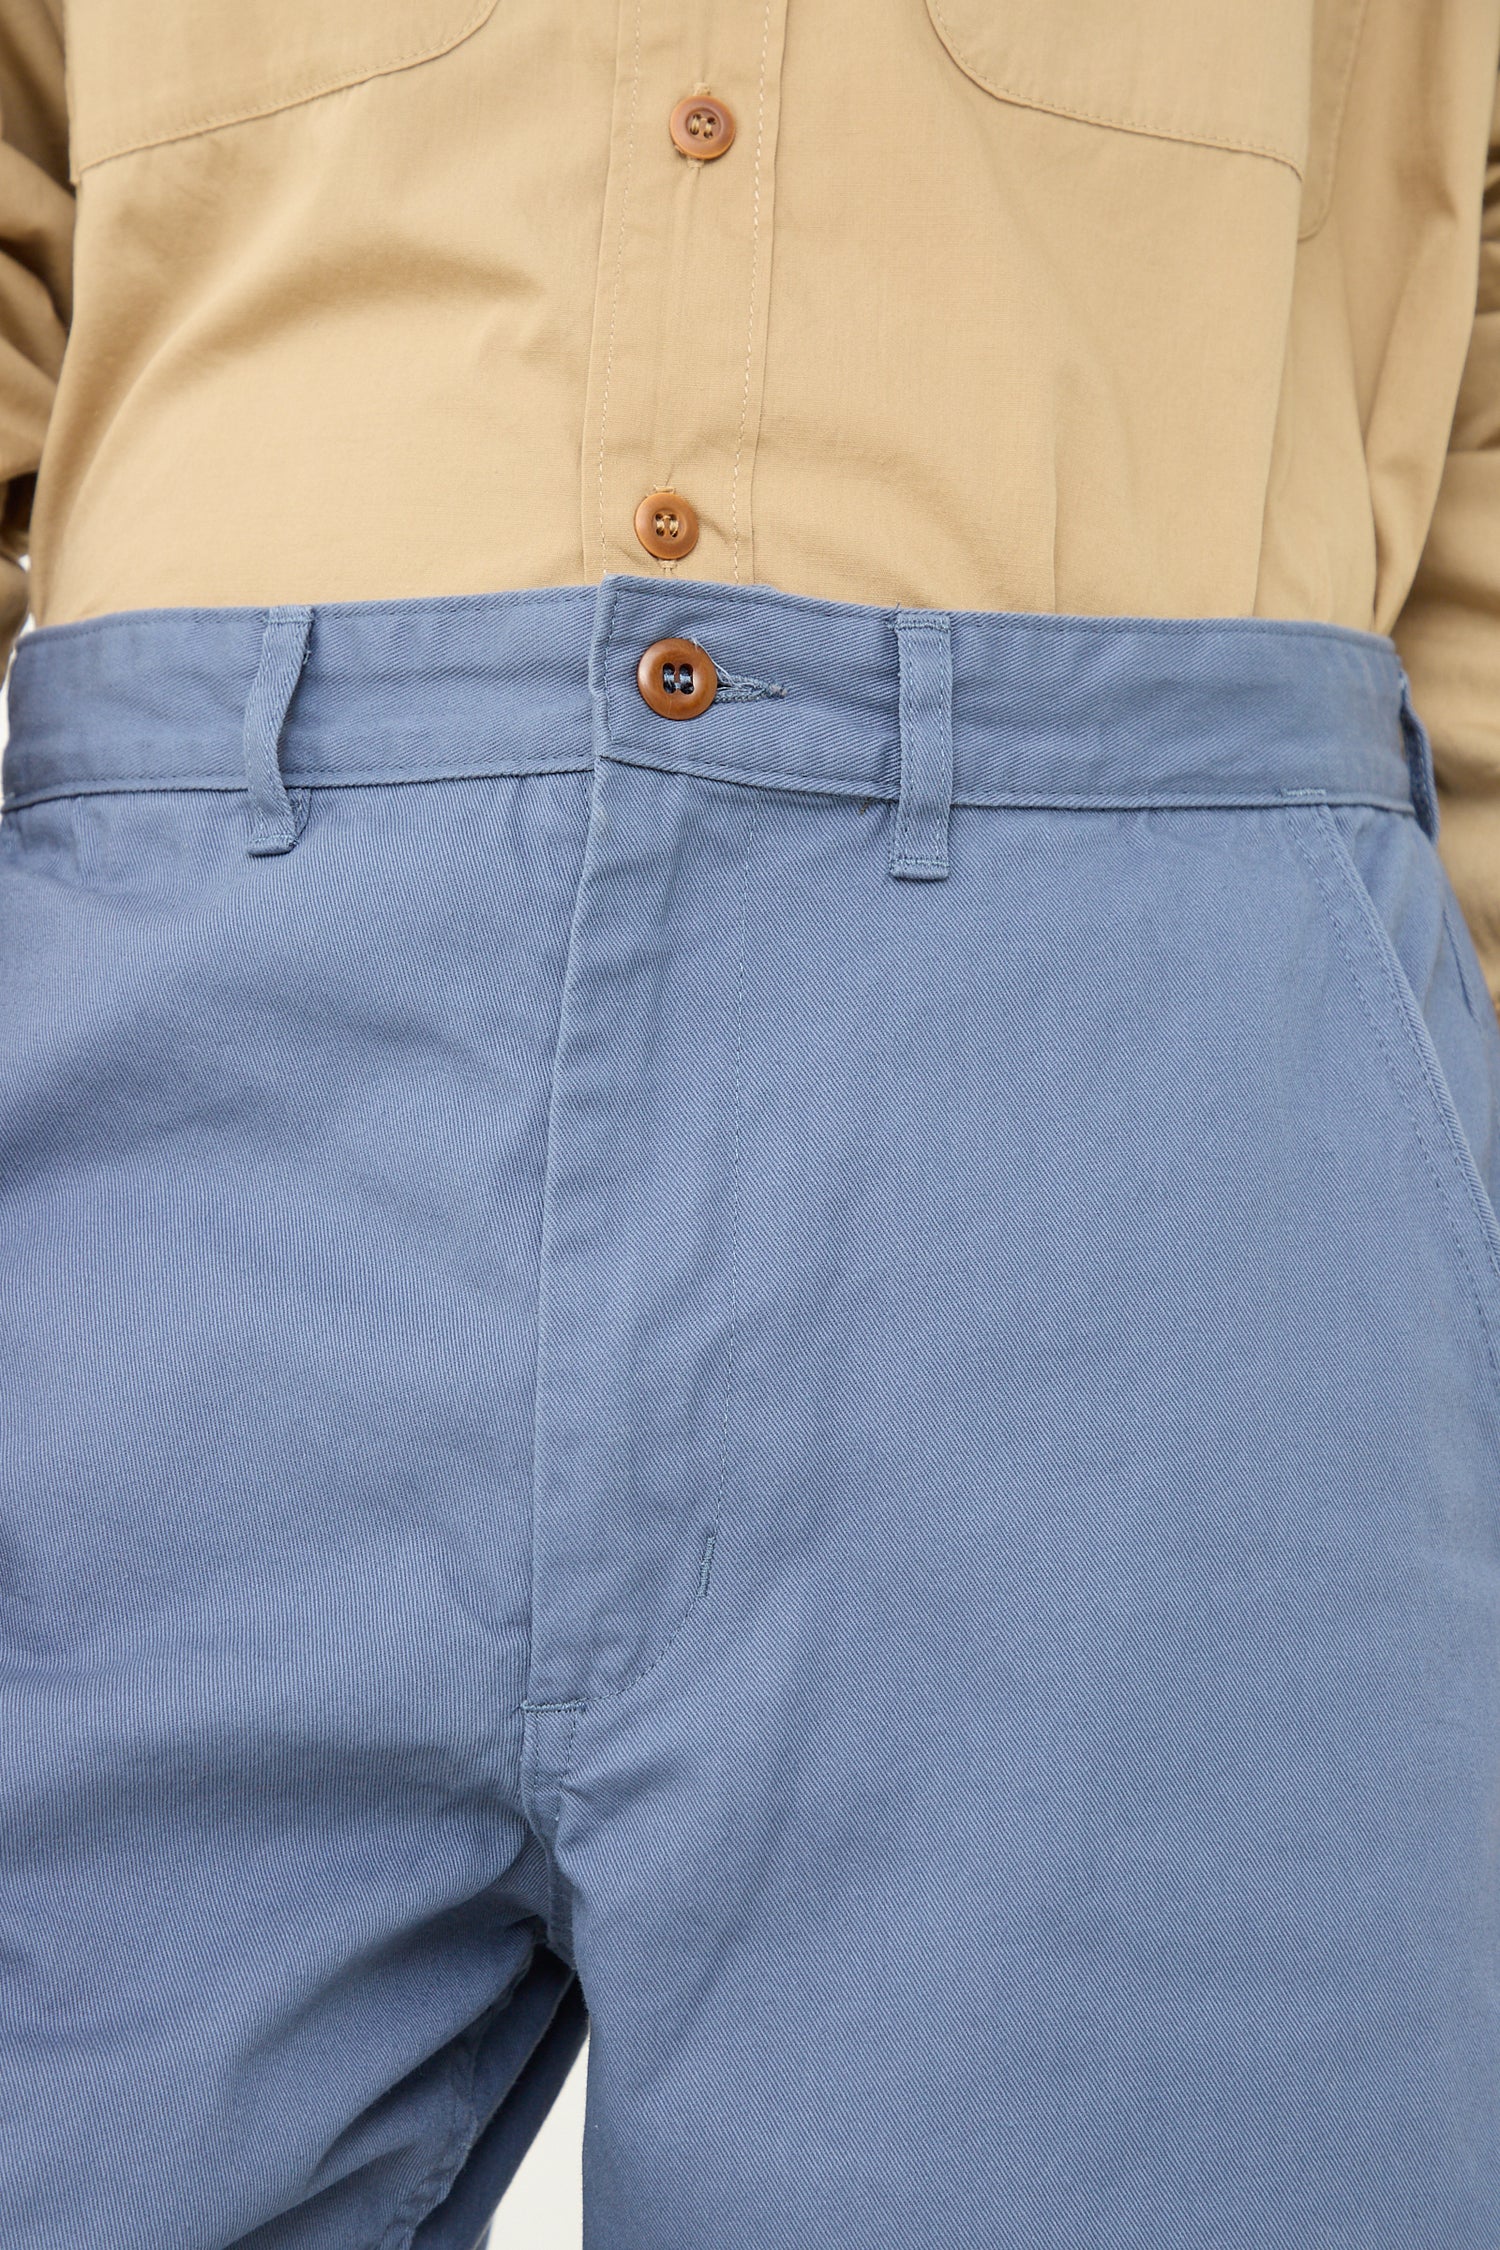 A close-up view of a person wearing beige and blue. The beige As Ever chino shirt is tucked into vintage military pants, which are secured by a button at the waistband.